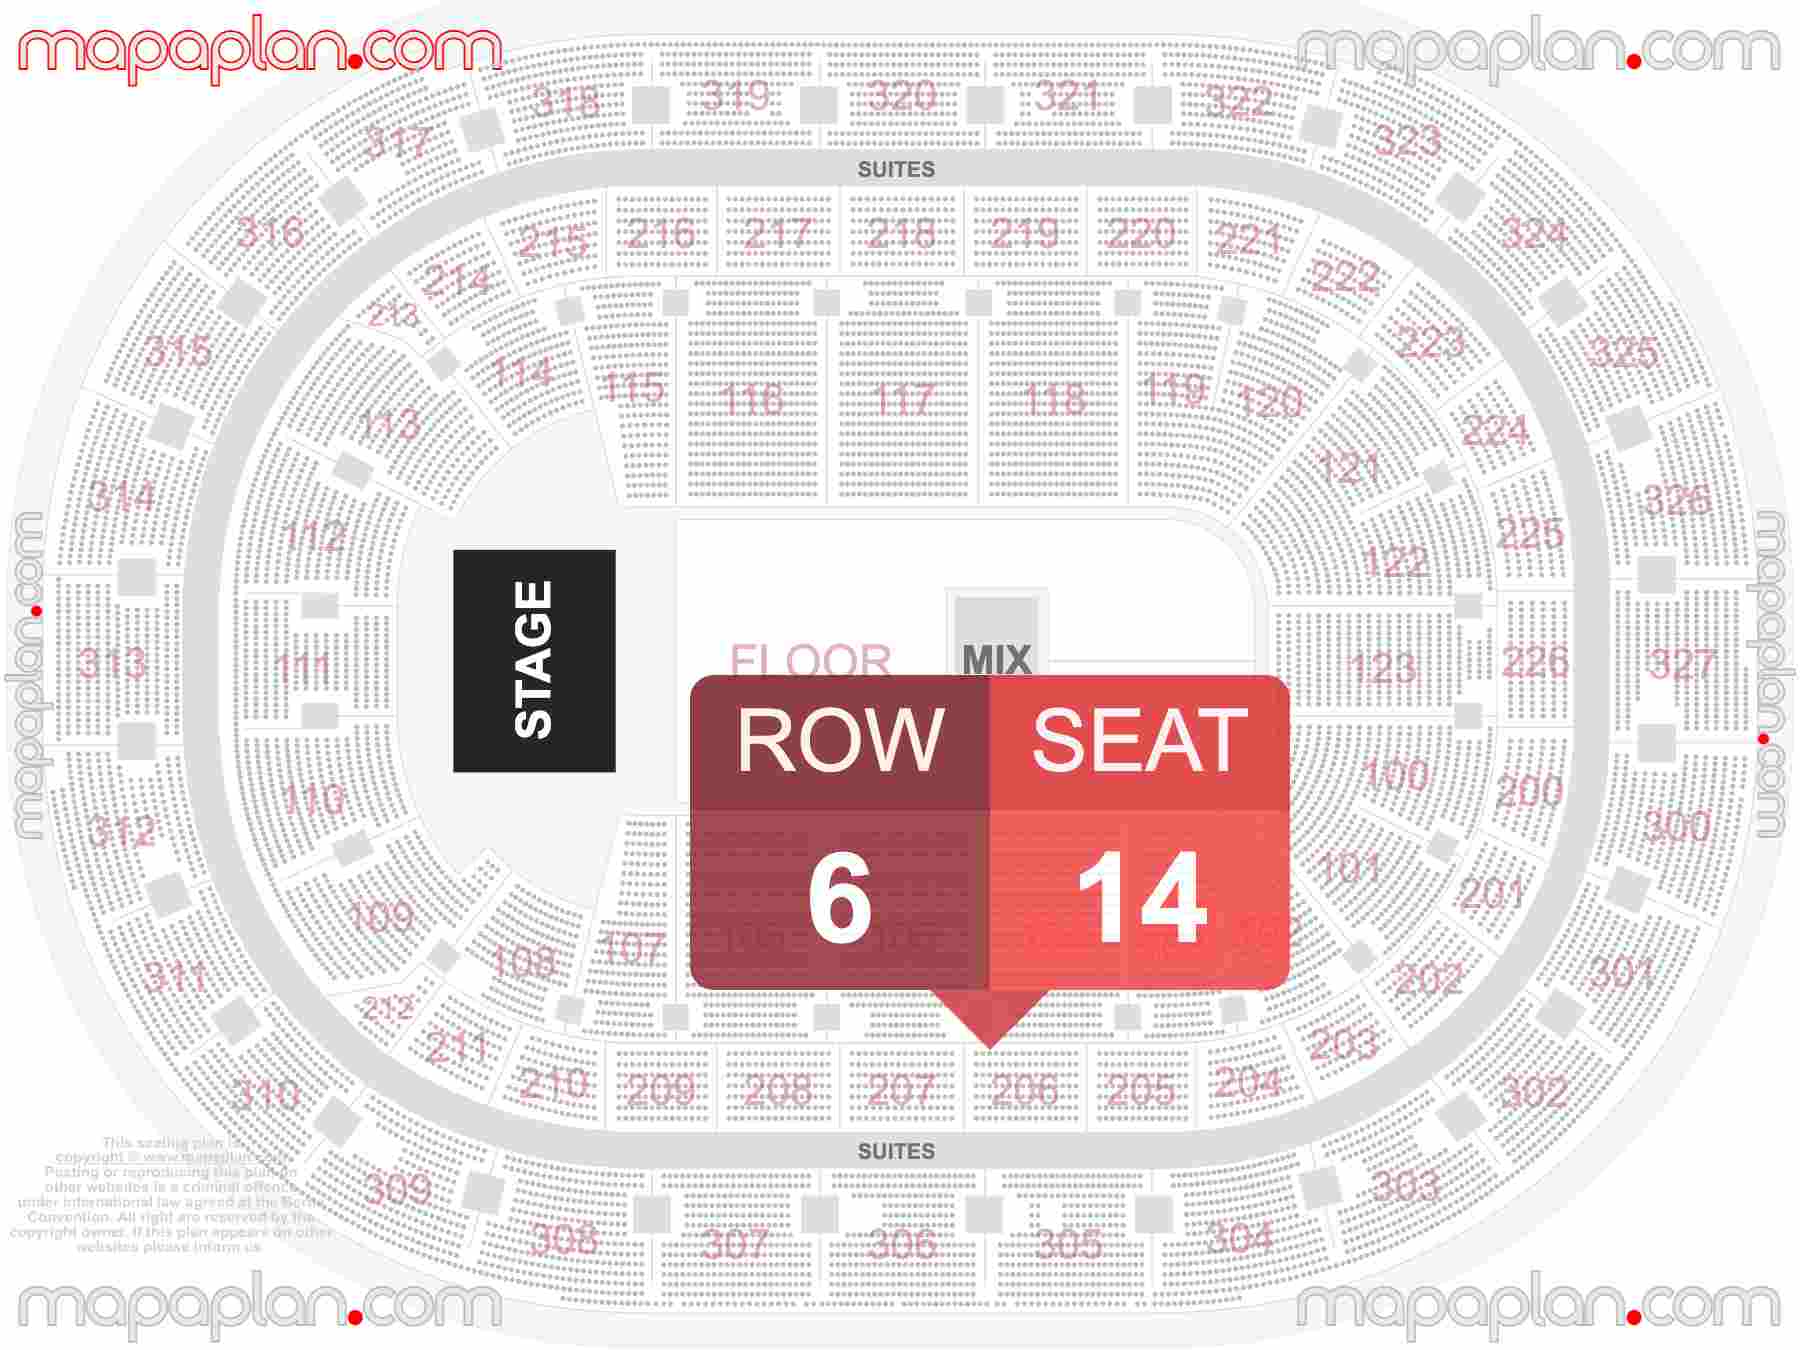 Buffalo KeyBank Center seating chart Concert with floor general admission standing room only seating plan - Interactive map to find best seat and row numbers